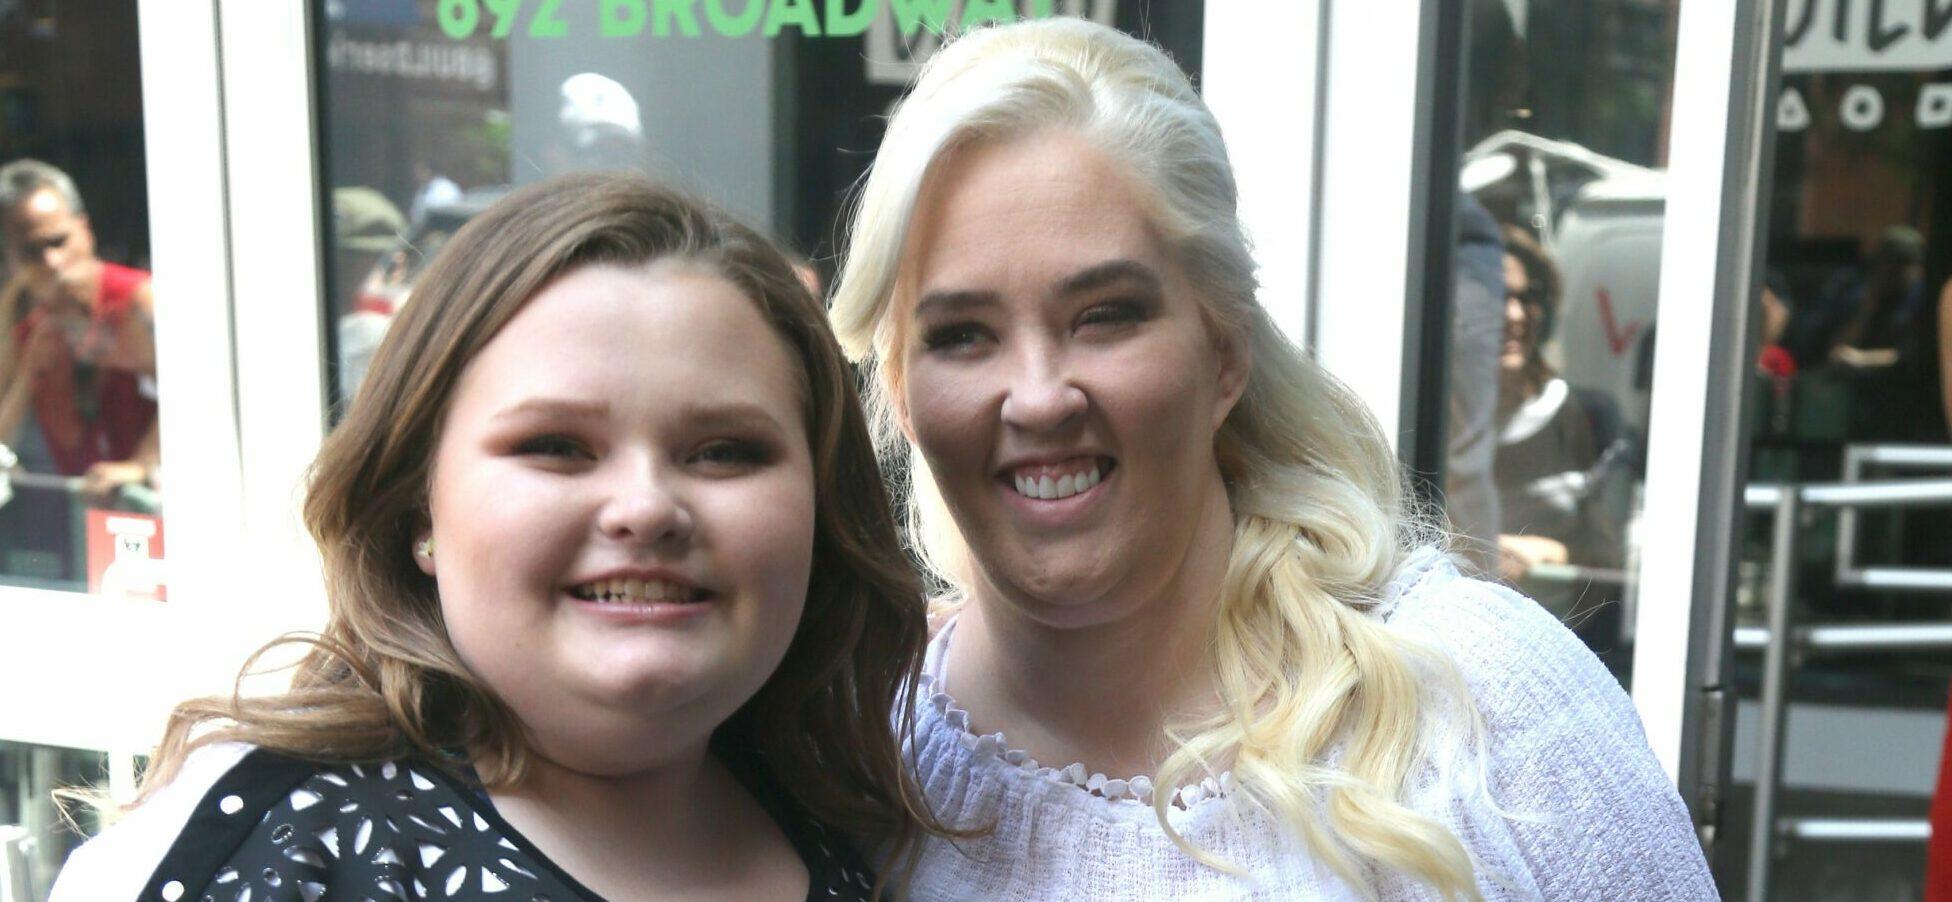 //Mama June daughters wedding scaled e